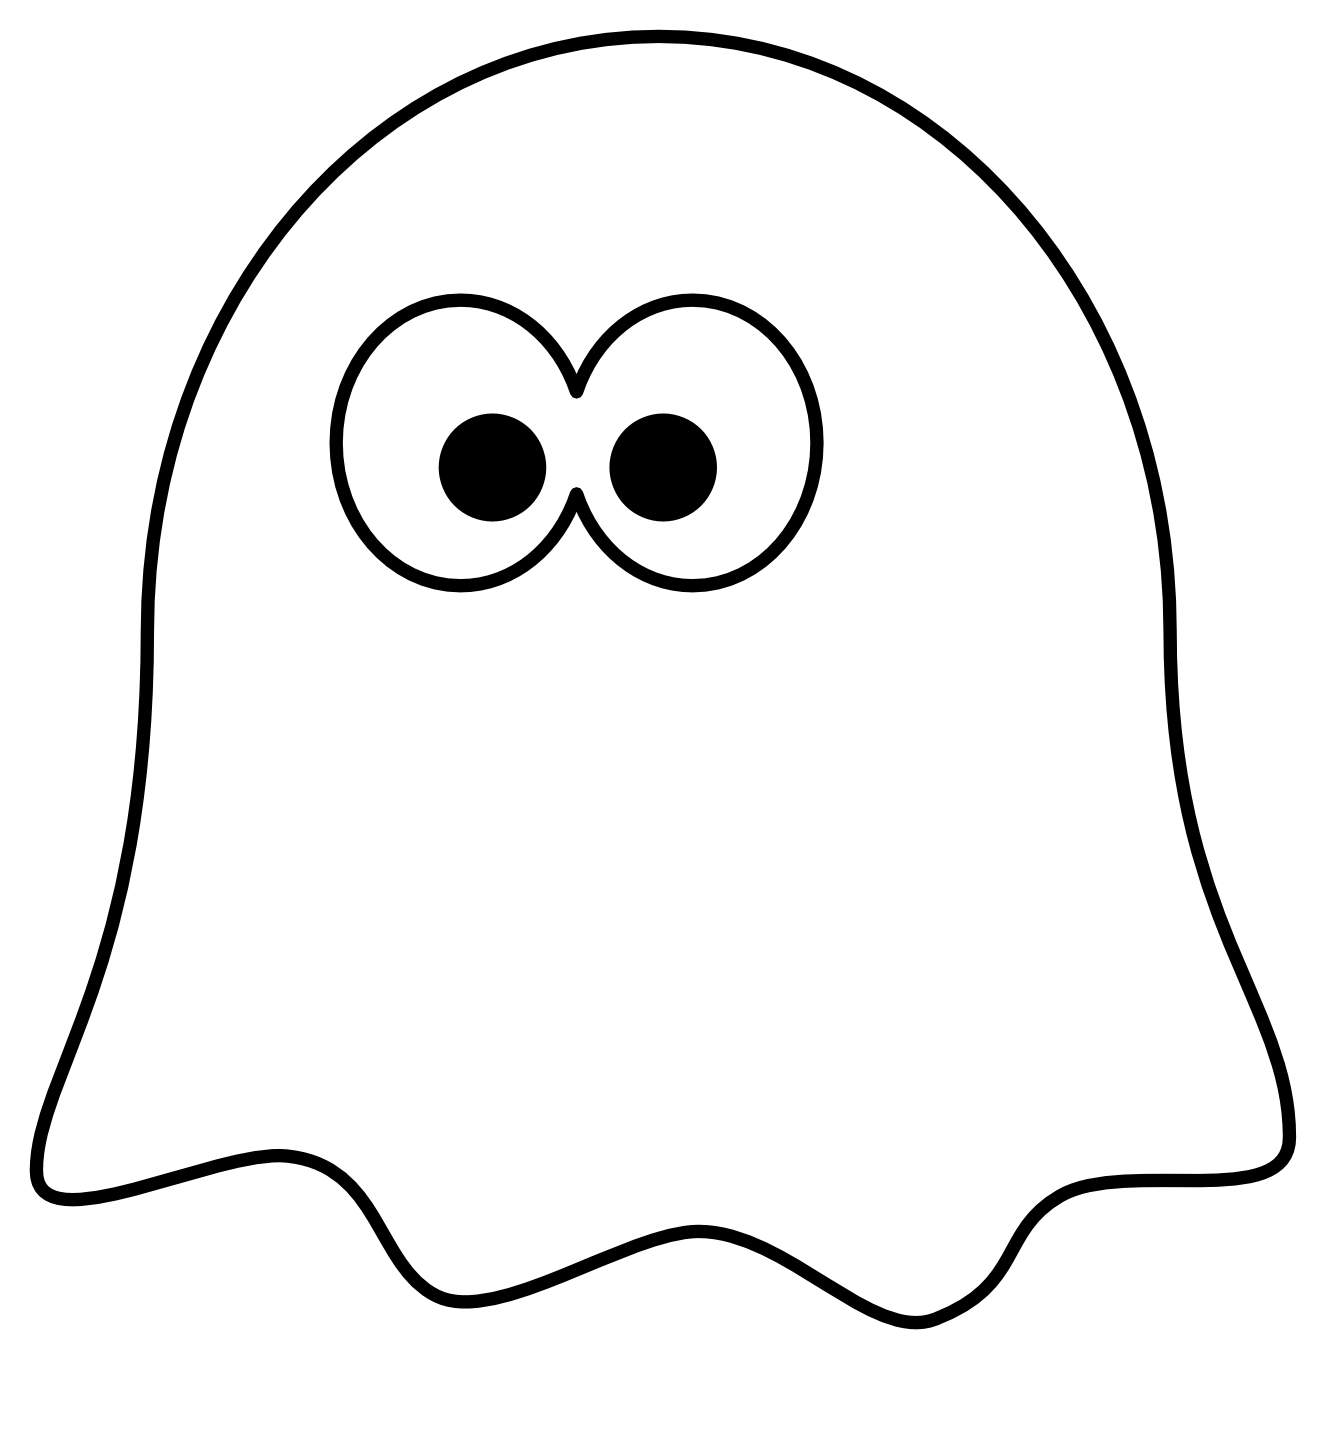 Ghost clipart cartoon, Ghost cartoon Transparent FREE for.